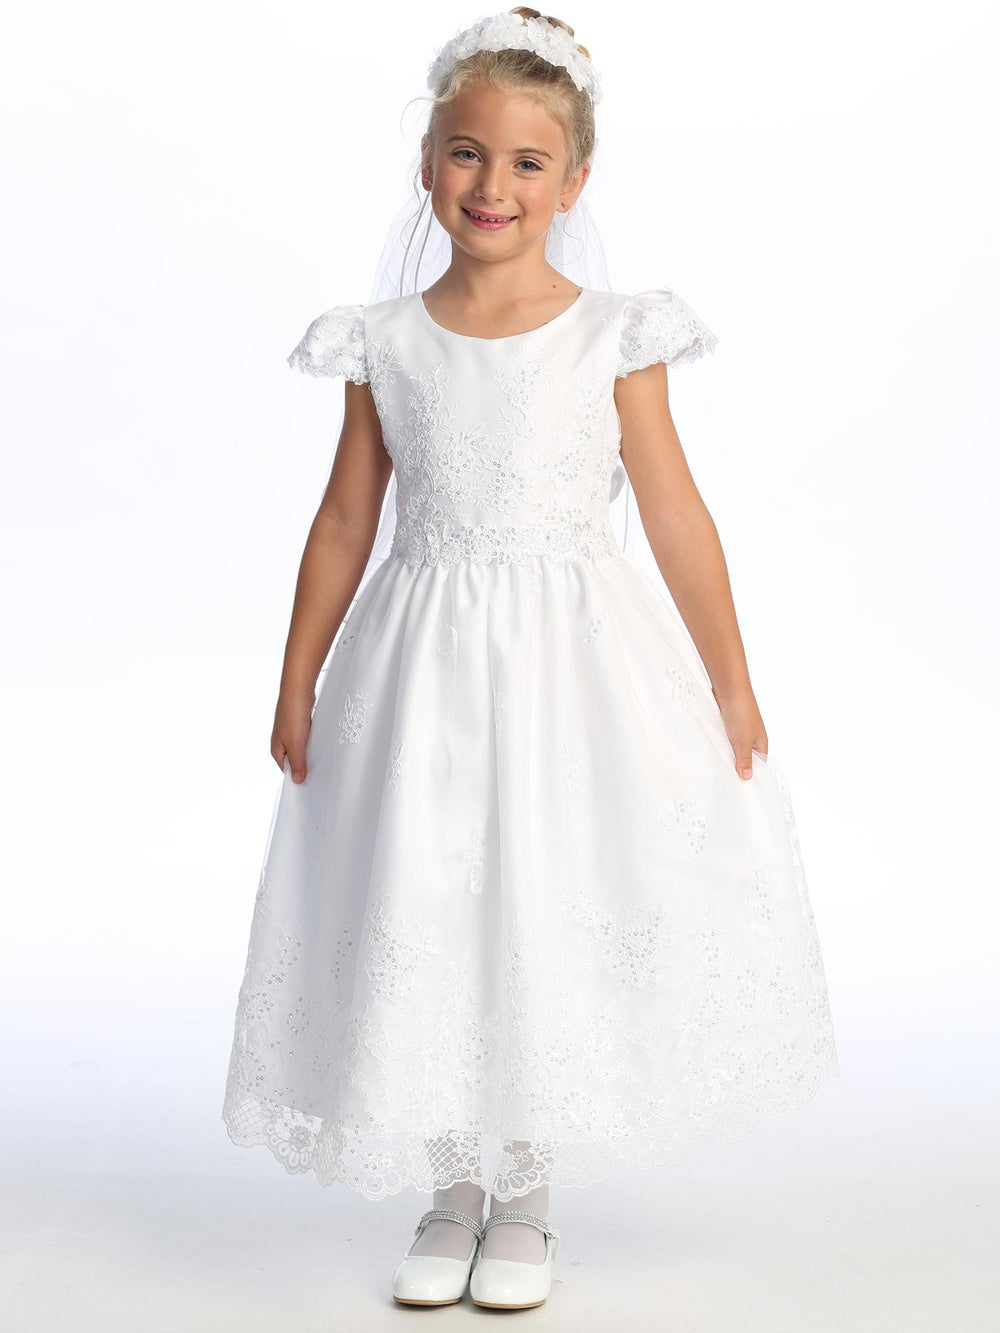 Girls White First Communion Dress w/ Embroidered Tulle & Sequins (209)